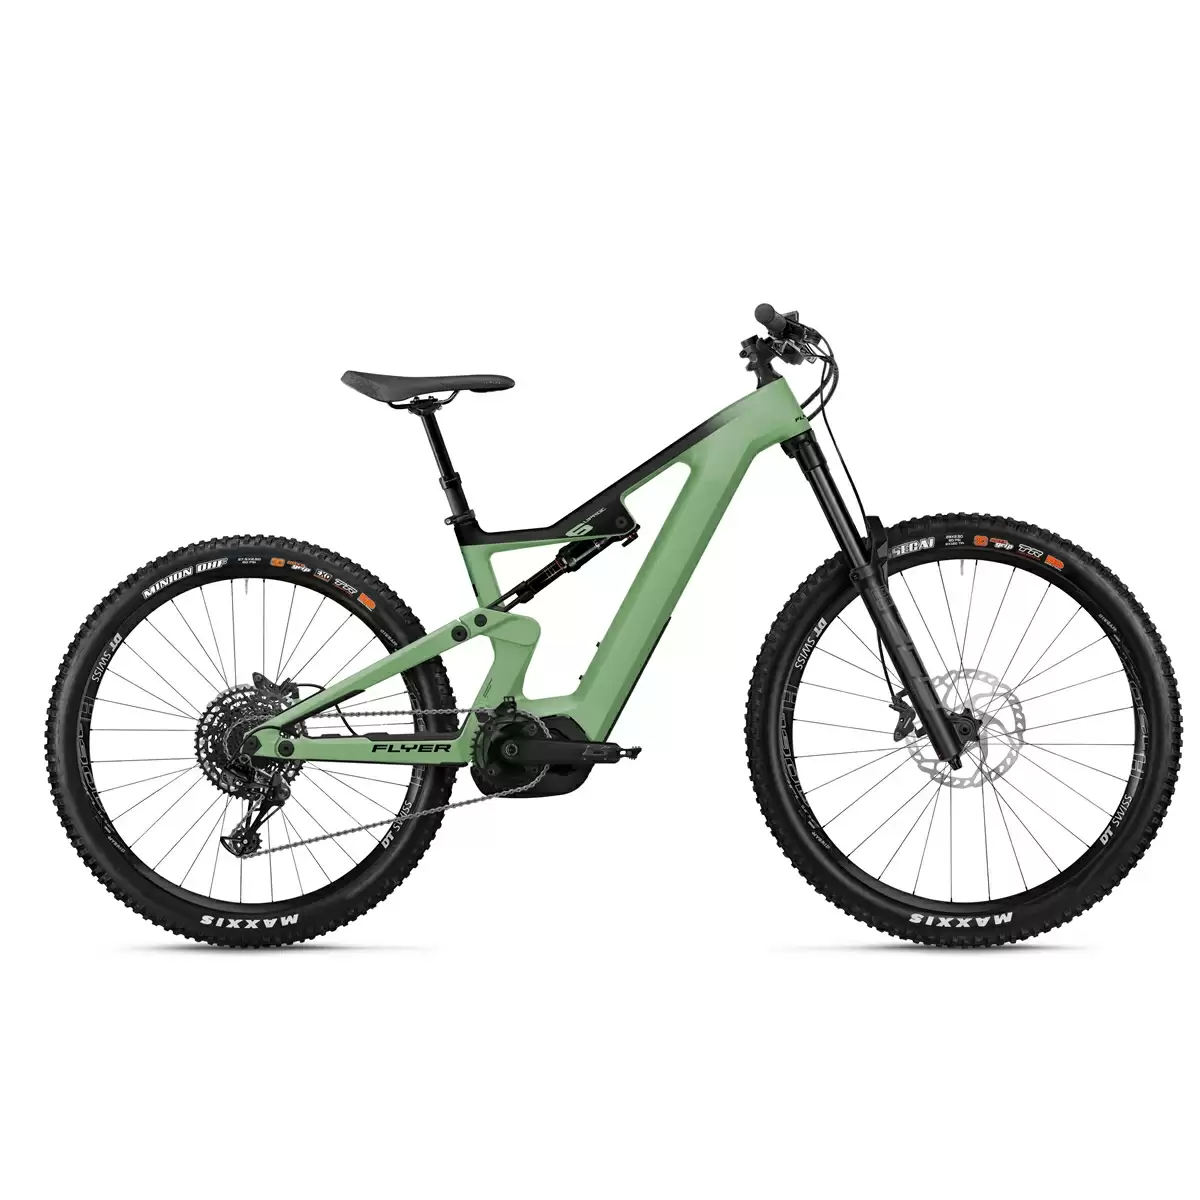 Uproc6 6.50 29''/27.5'' 170mm 12s 625Wh Bosch Performance CX Green 2021 Size S - image